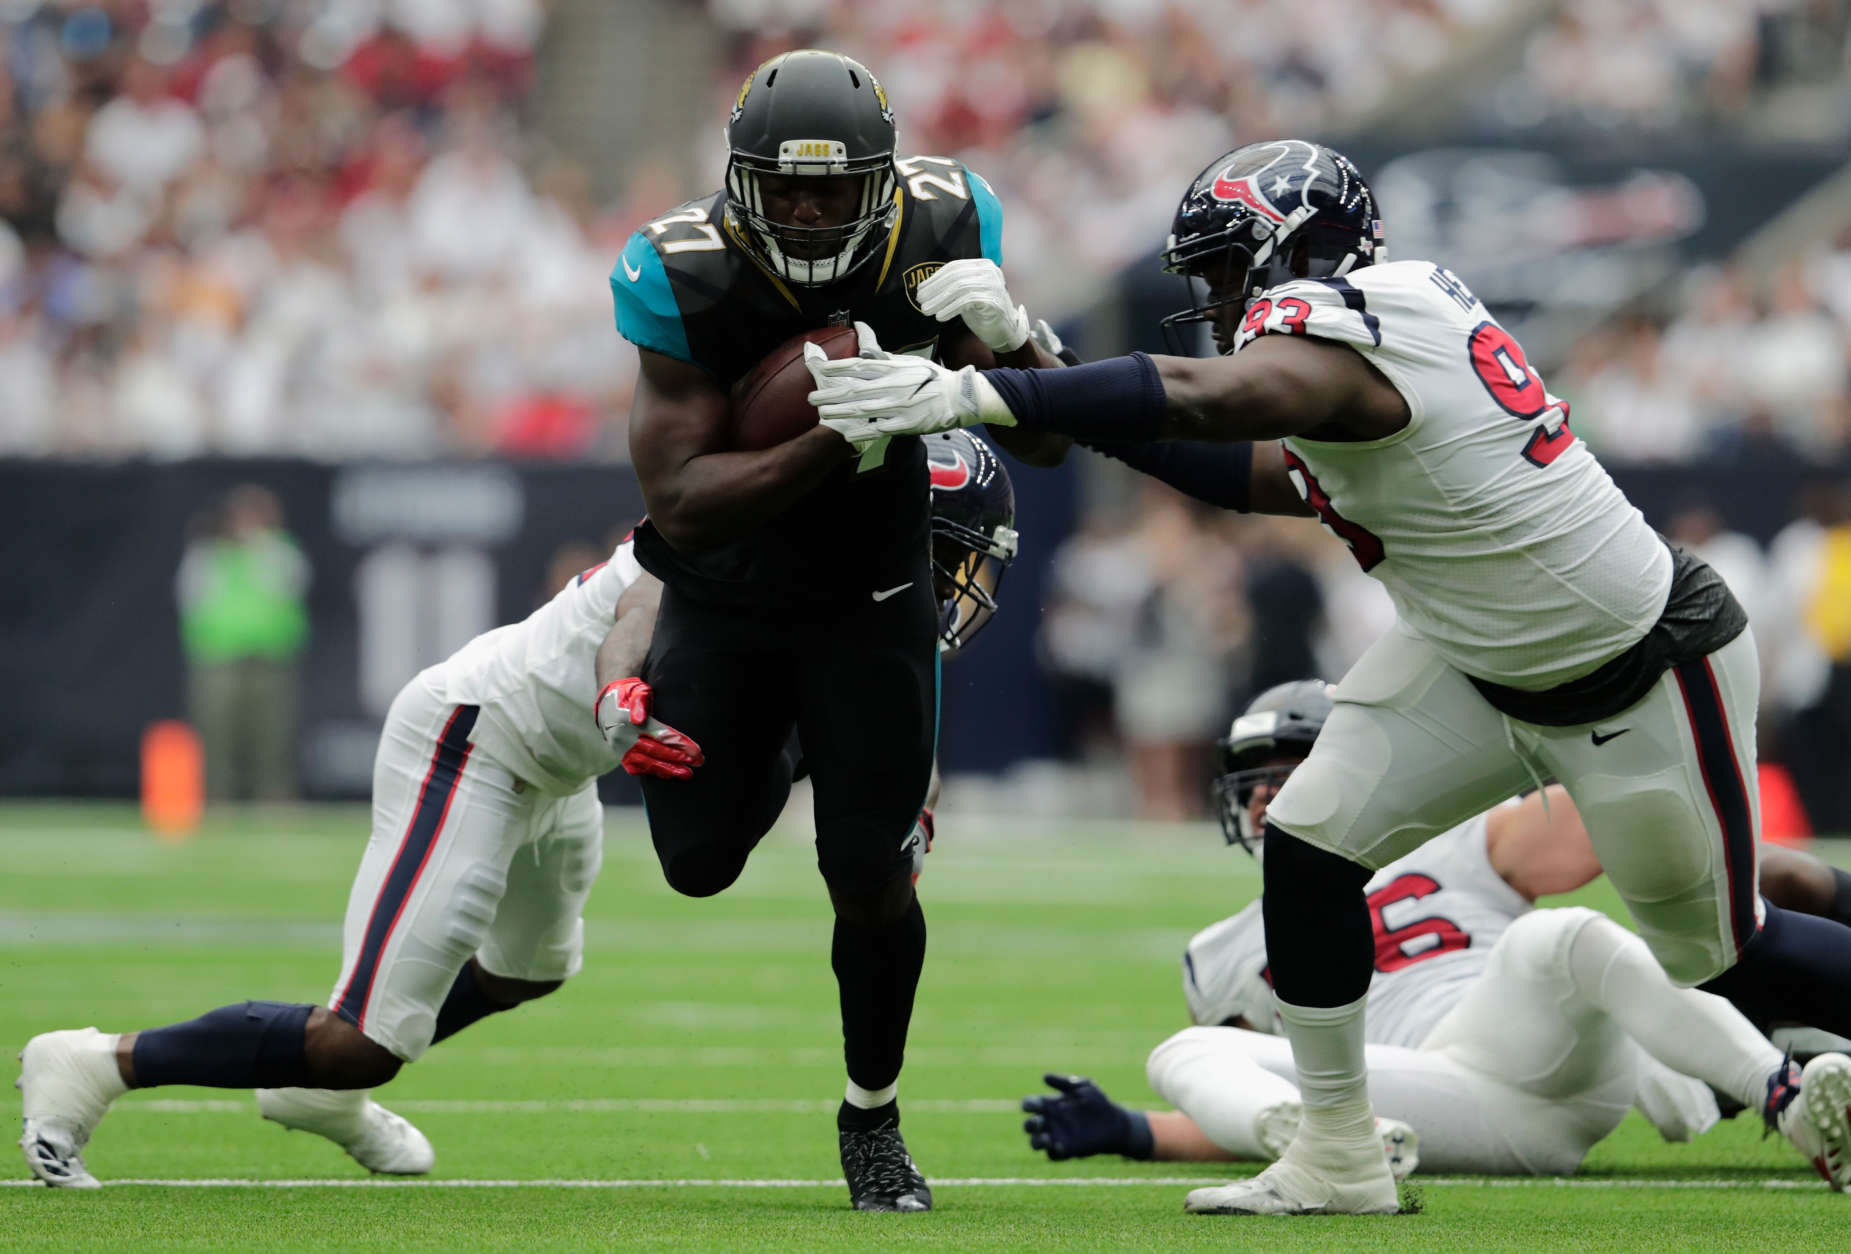 HOUSTON, TX - SEPTEMBER 10:  Leonard Fournette #27 of the Jacksonville Jaguars is tackled by Johnathan Joseph #24 and Joel Heath #93 of the Houston Texans in the first quarter at NRG Stadium on September 10, 2017 in Houston, Texas.  (Photo by Tim Warner/Getty Images)